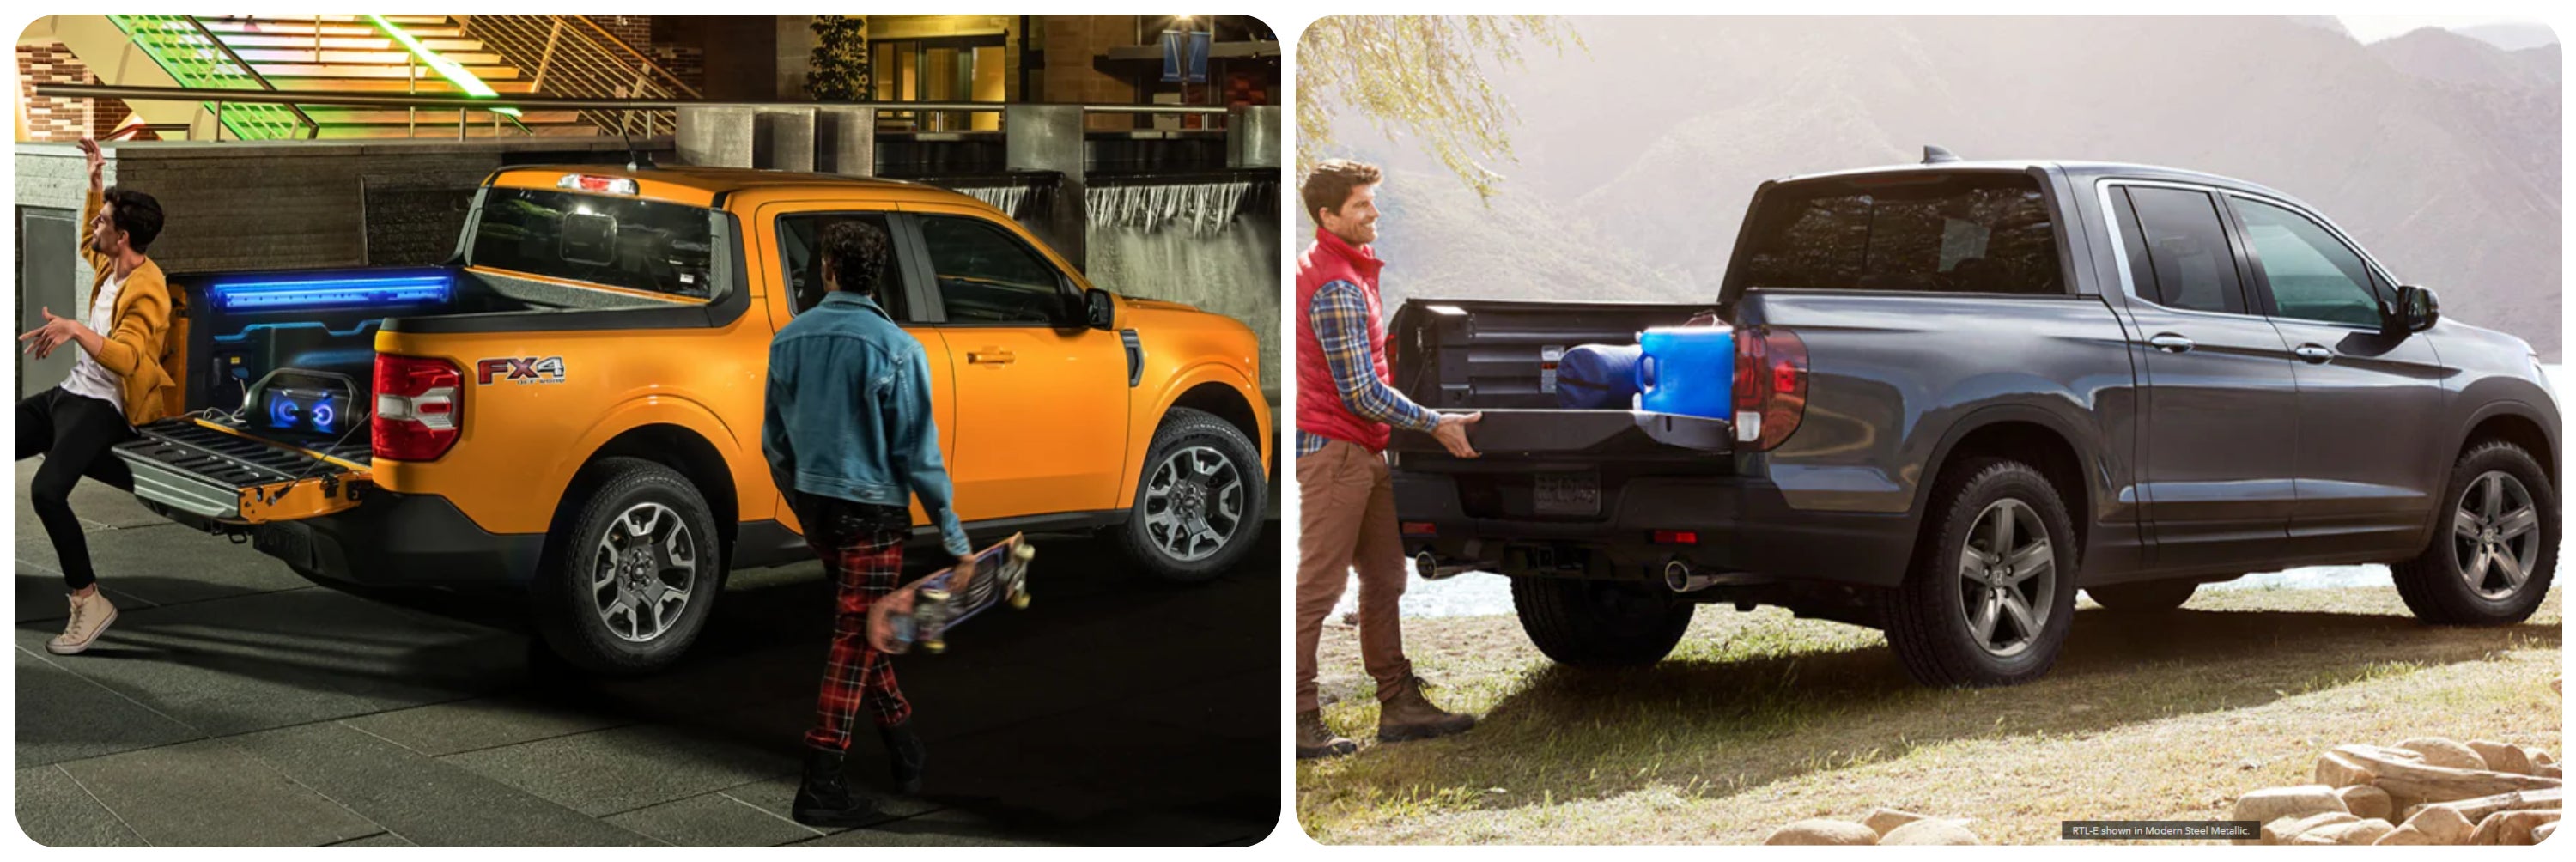 On the left a couple men hang out near the rear of a yellow 2022 Ford Ranger. On the right a man loads cargo into the bed of a gray 2022 Honda Ridgeline